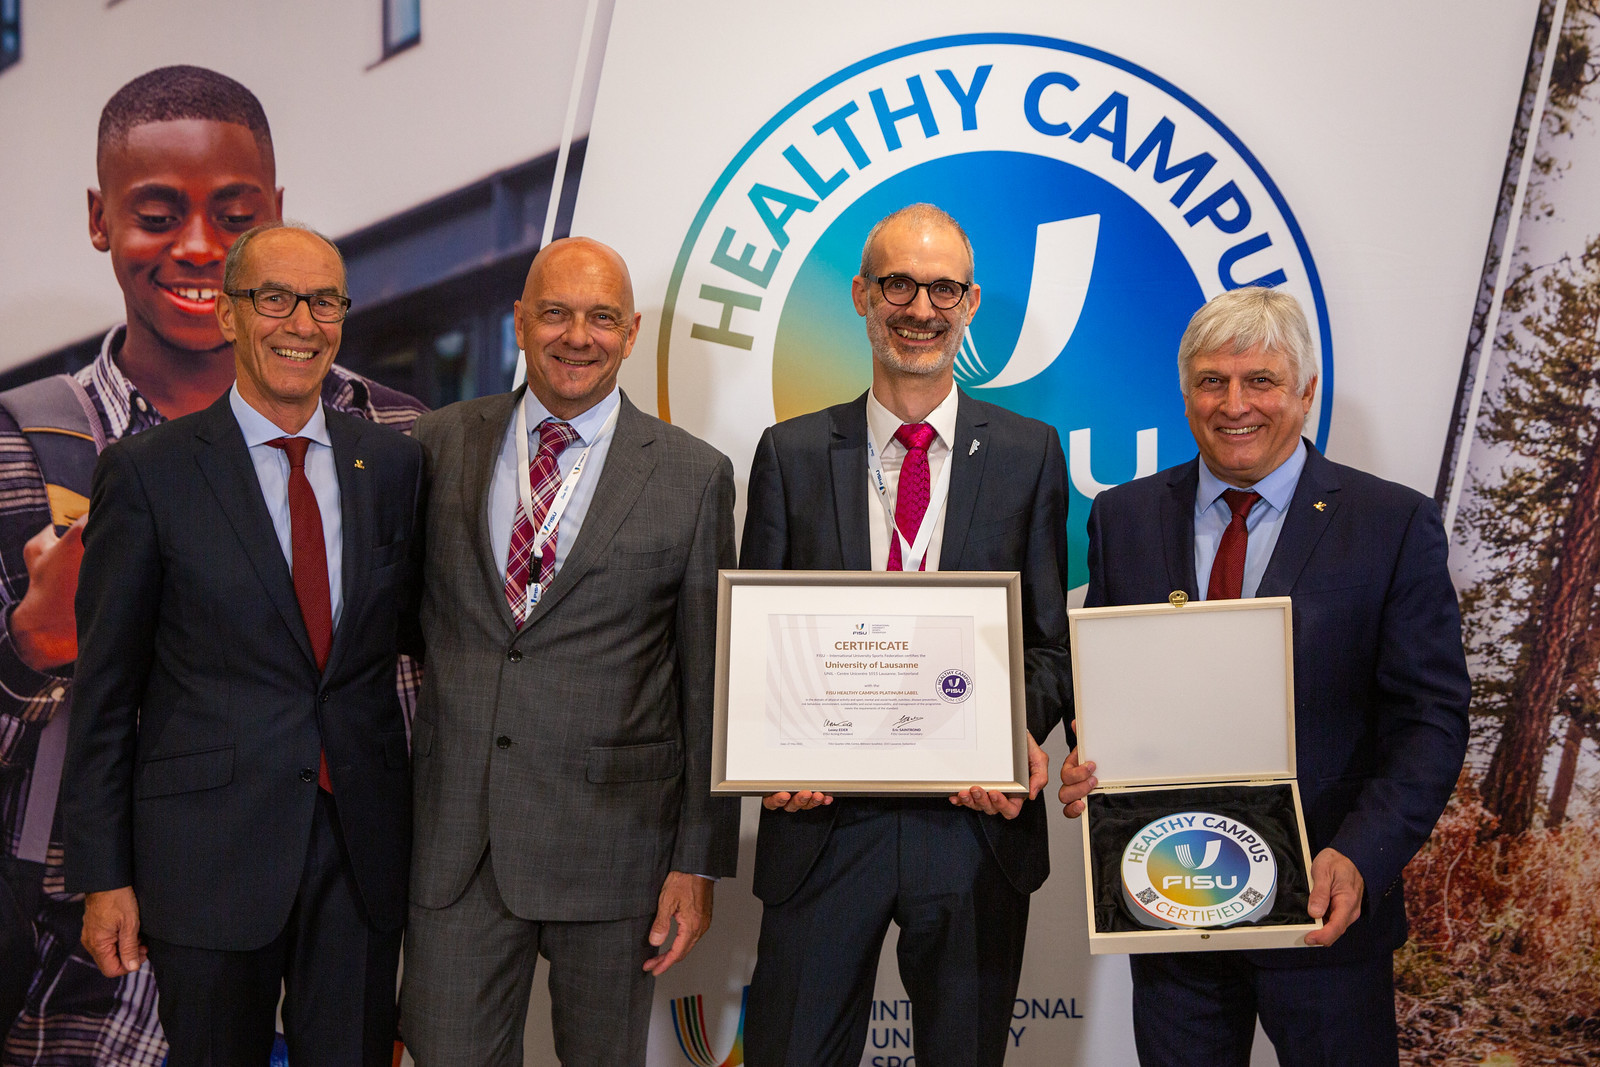 The Healthy Campus project is among the university sport initiatives being developed by FISU ©FISU